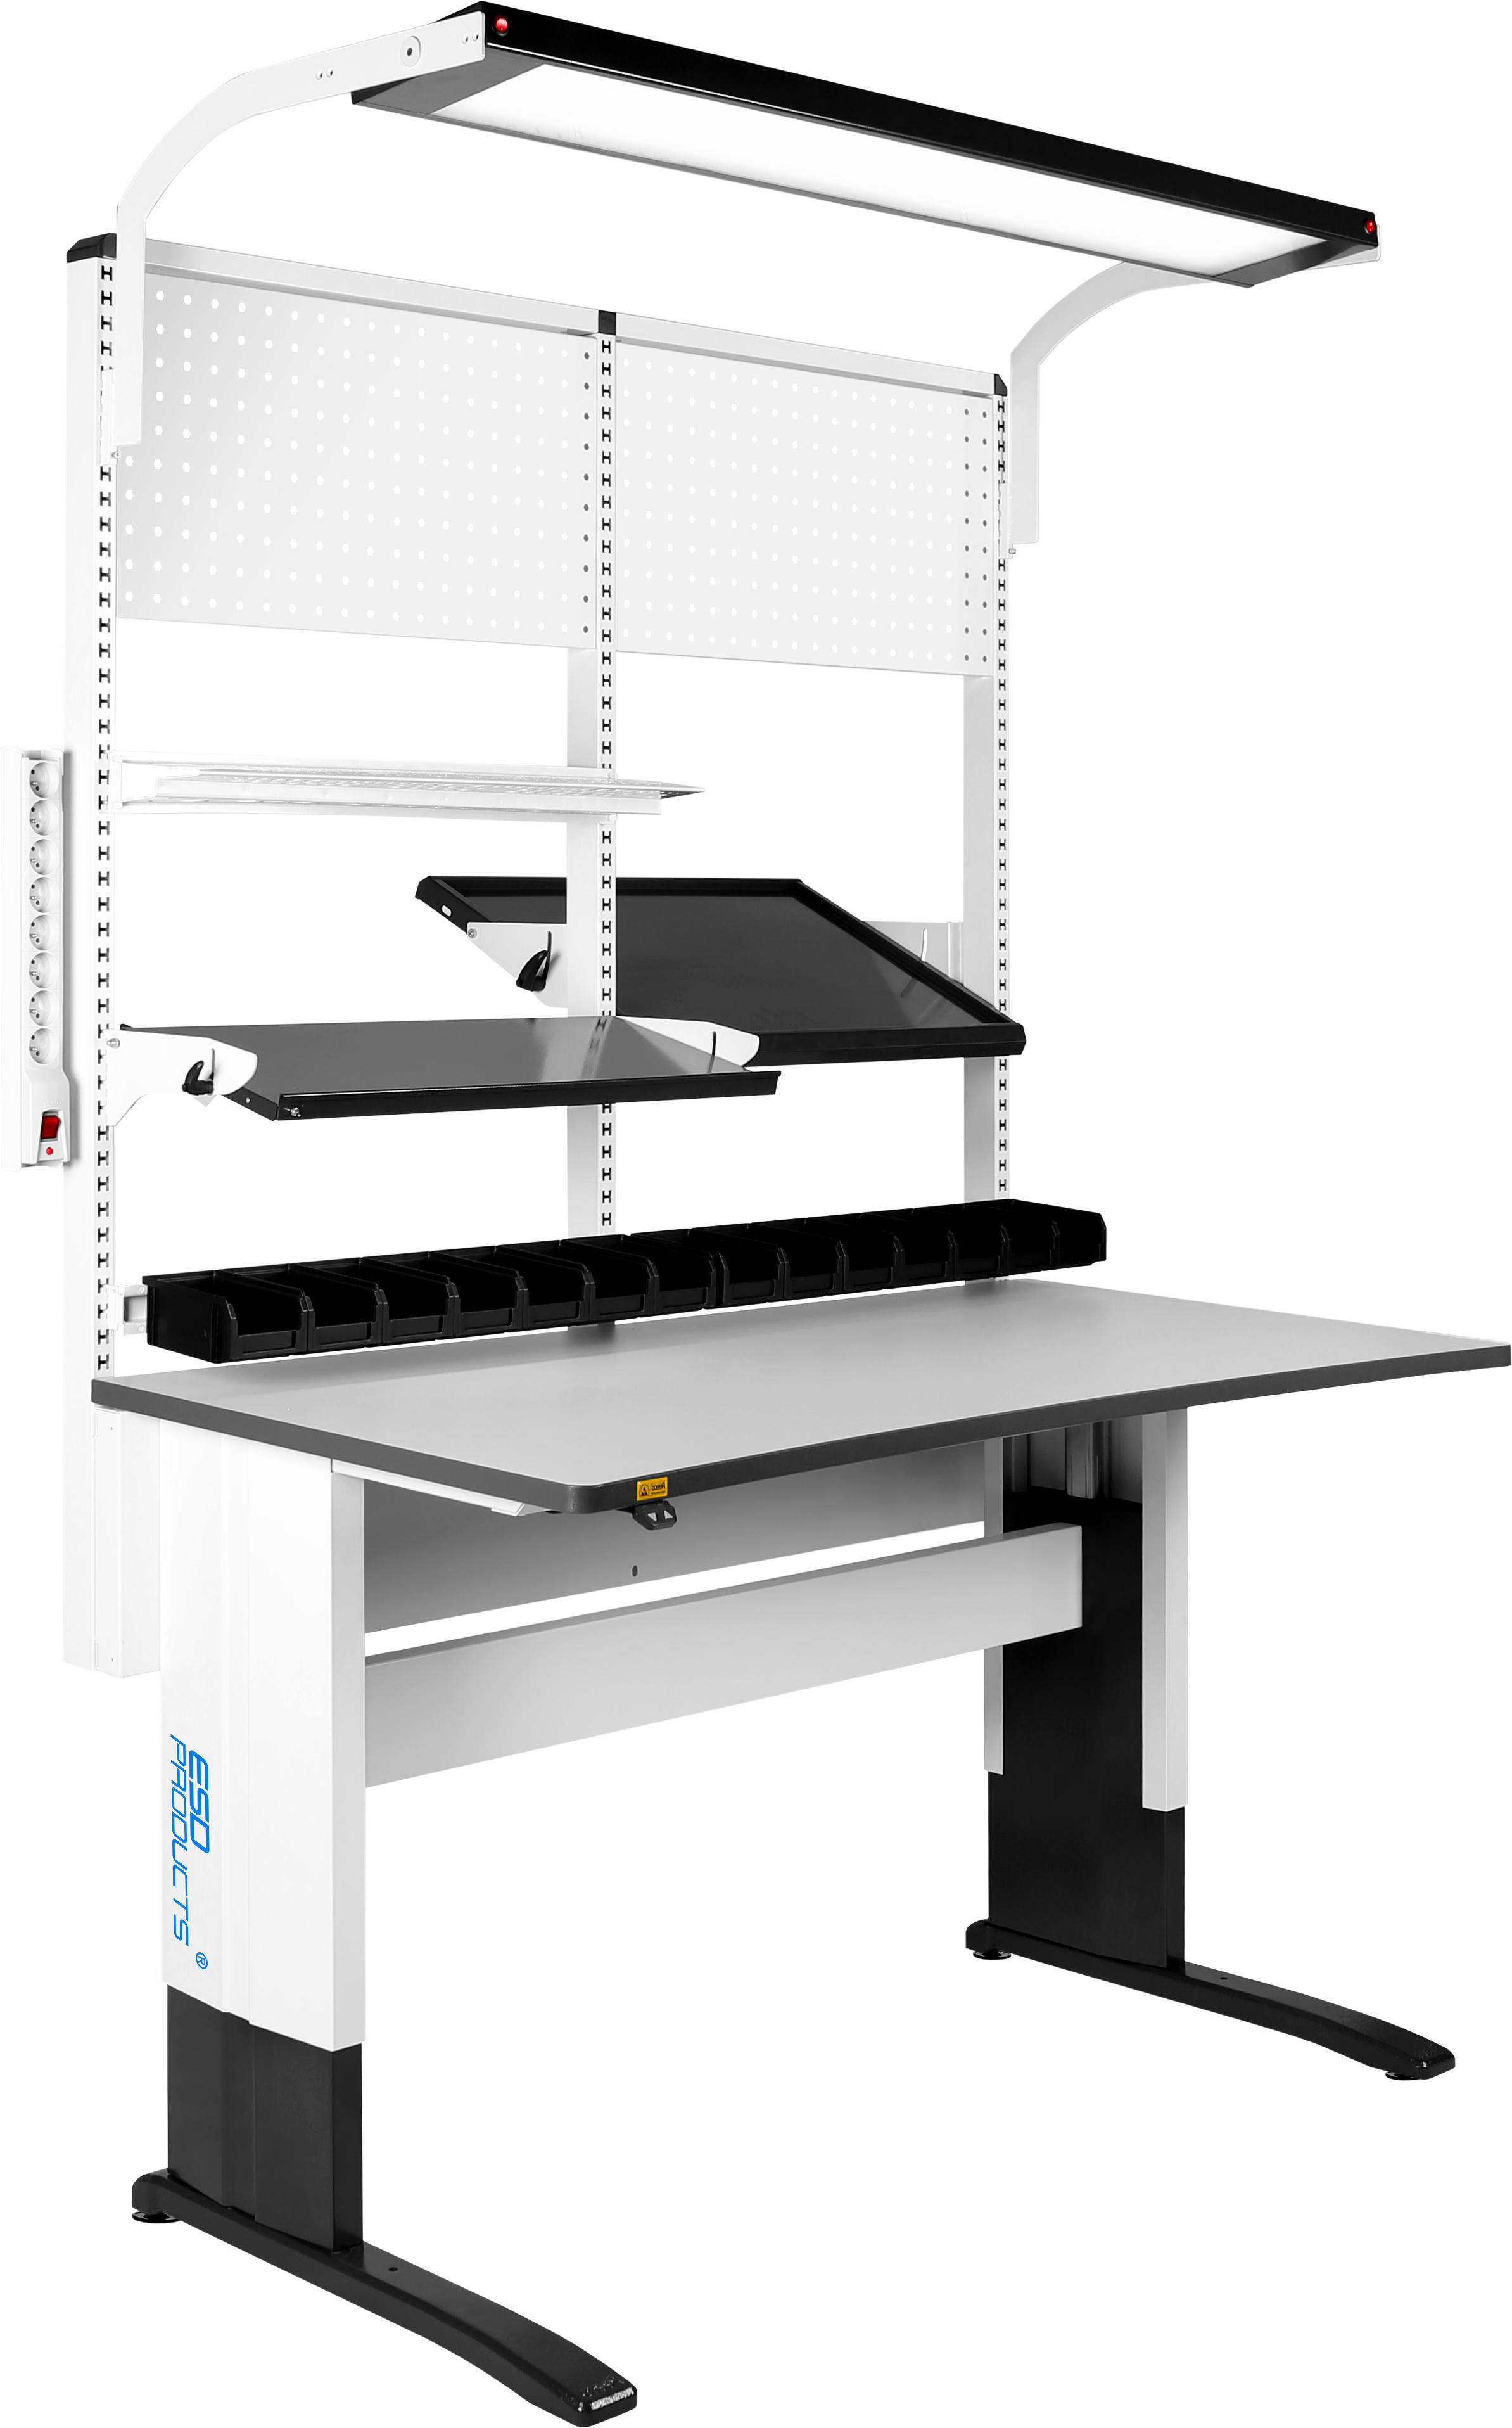 Electrically-Adjustable-Workstation-ESD-Standard-Rectangular-Table-Top-Reeco-Robert-1530-x-750-mm-ESD-Products-AES